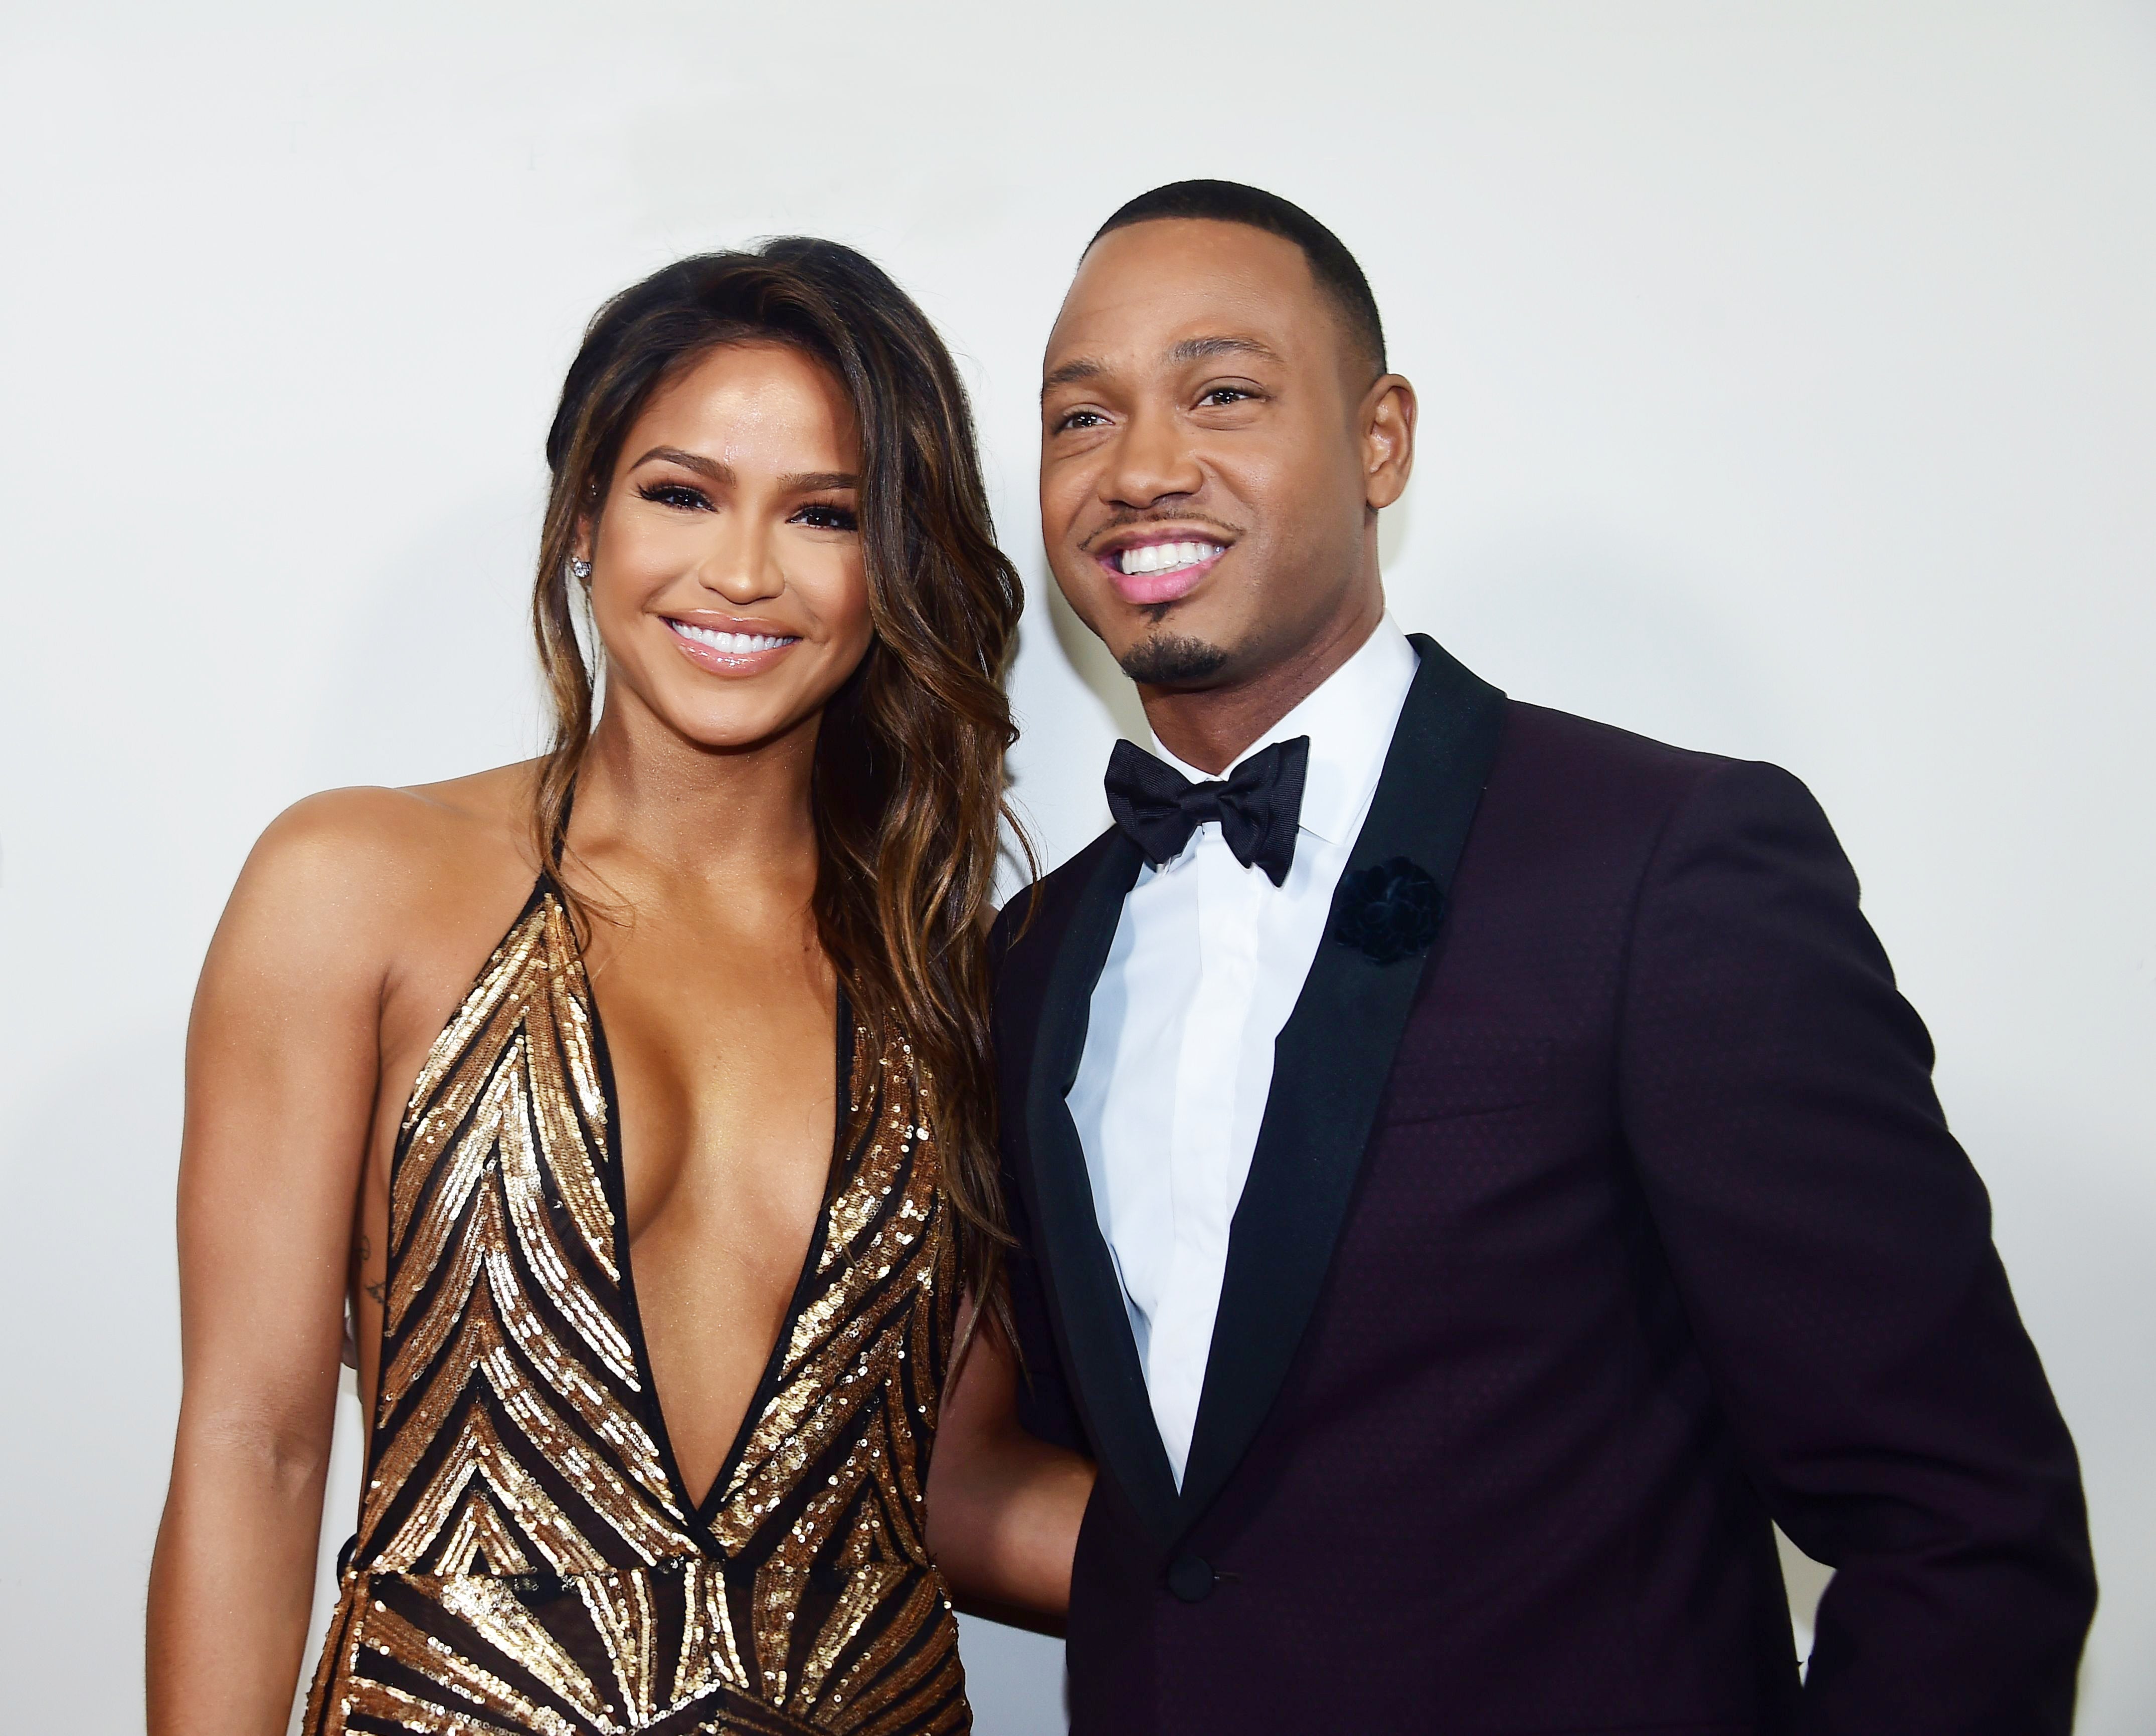 Red Carpet Recap: Queen Latifah, Paula Patton, Terrence J, and More, Shine at ‘The Perfect Match’ Premiere